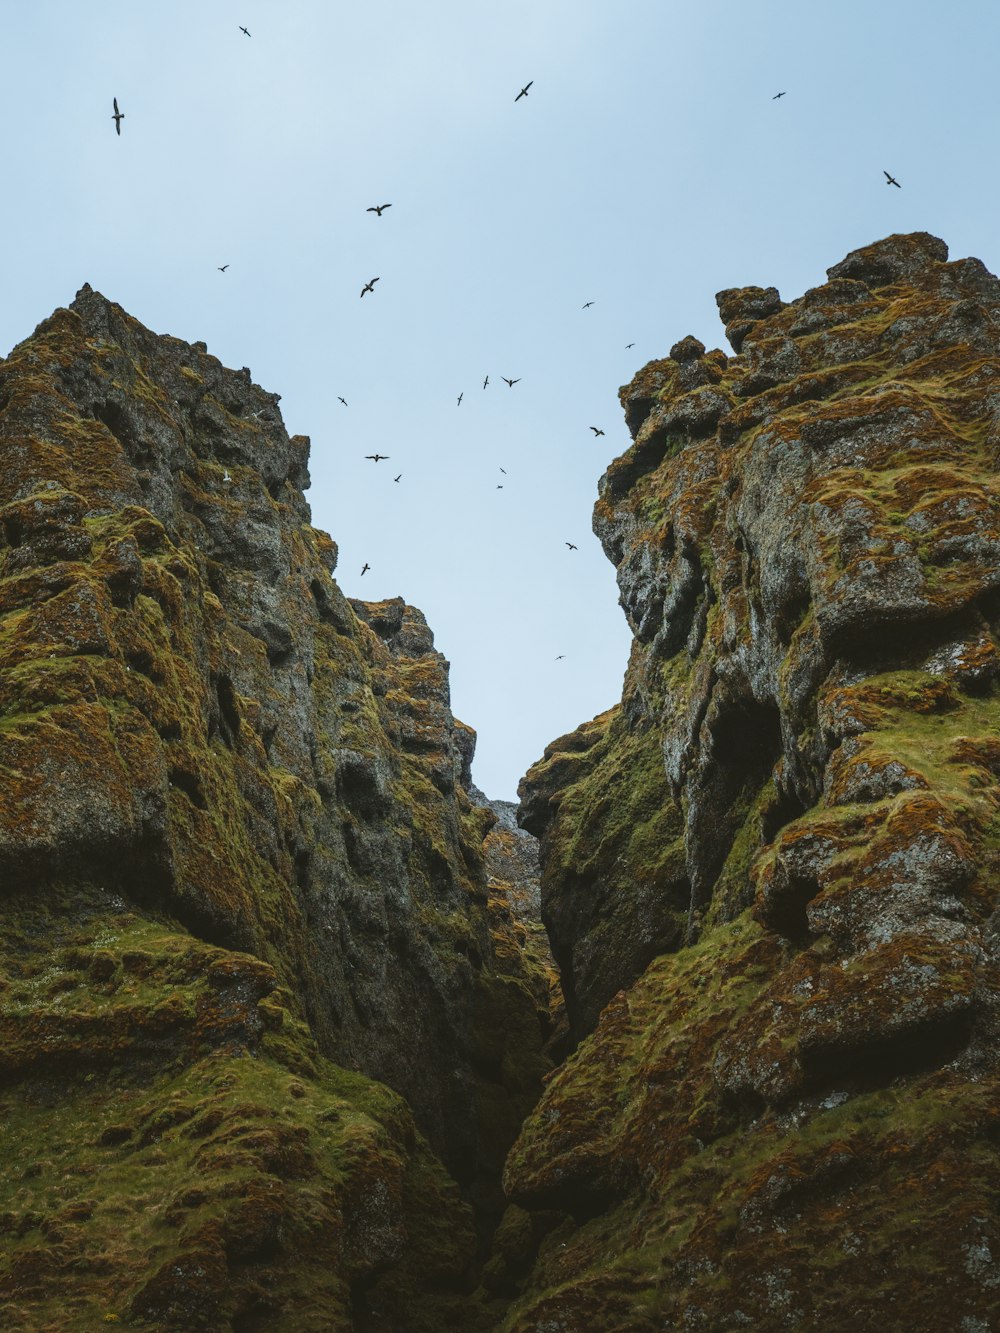 a group of birds flying over a rocky cliff